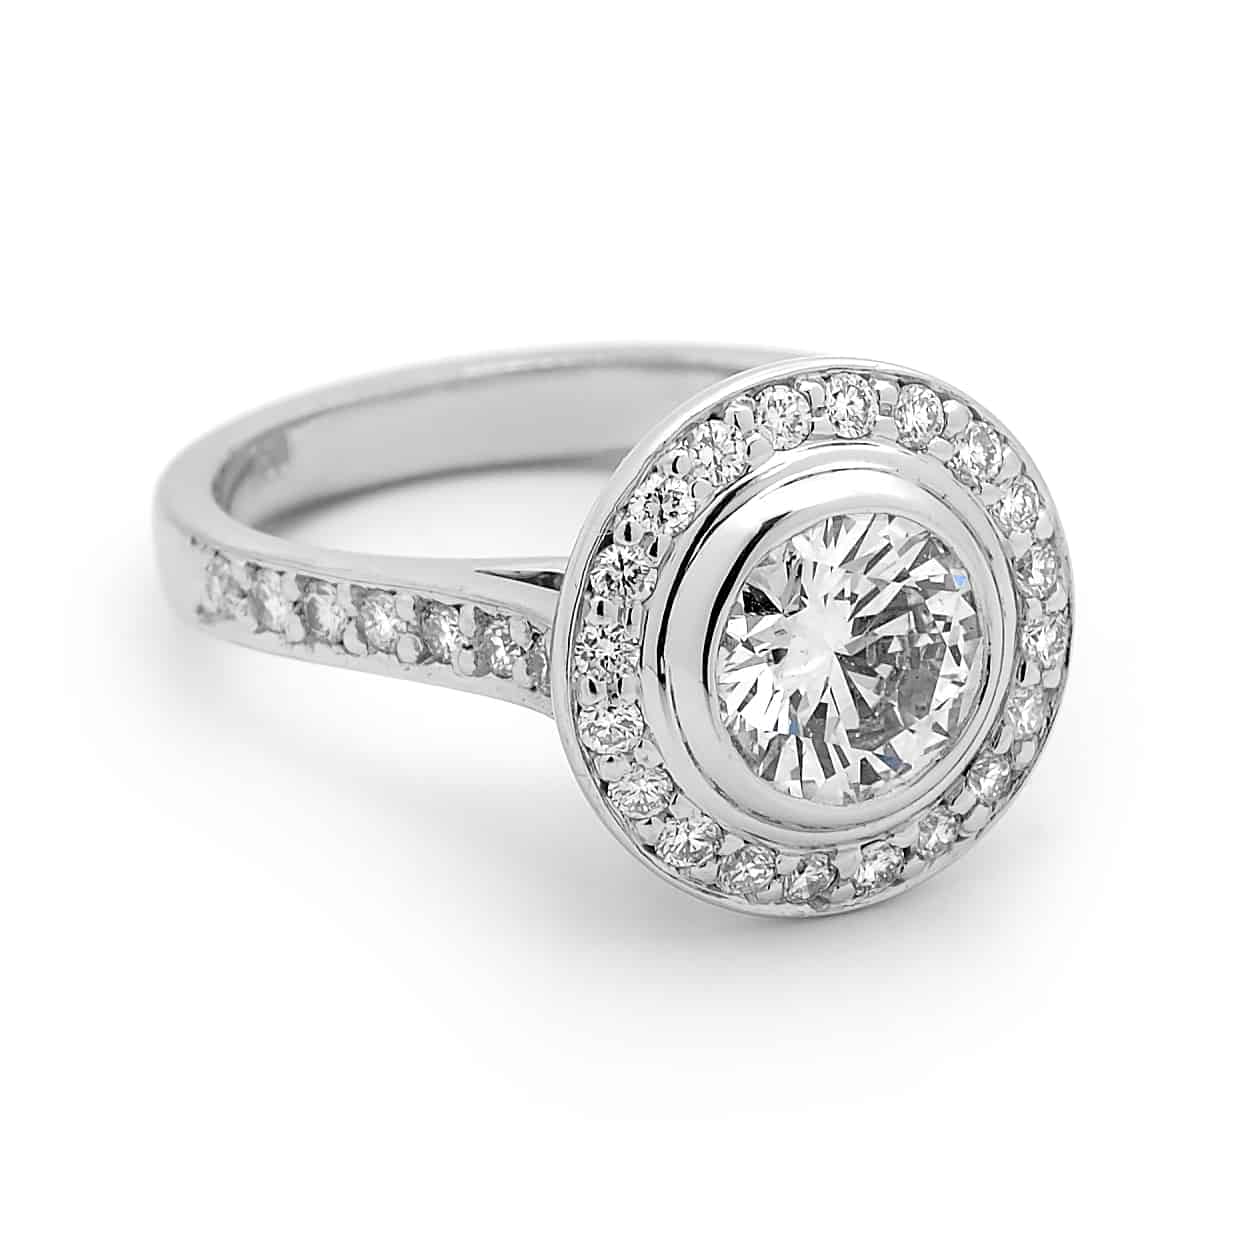 Riley bezel set solitaire engagement ring with halo polished finish – CLIQ  Jewelry